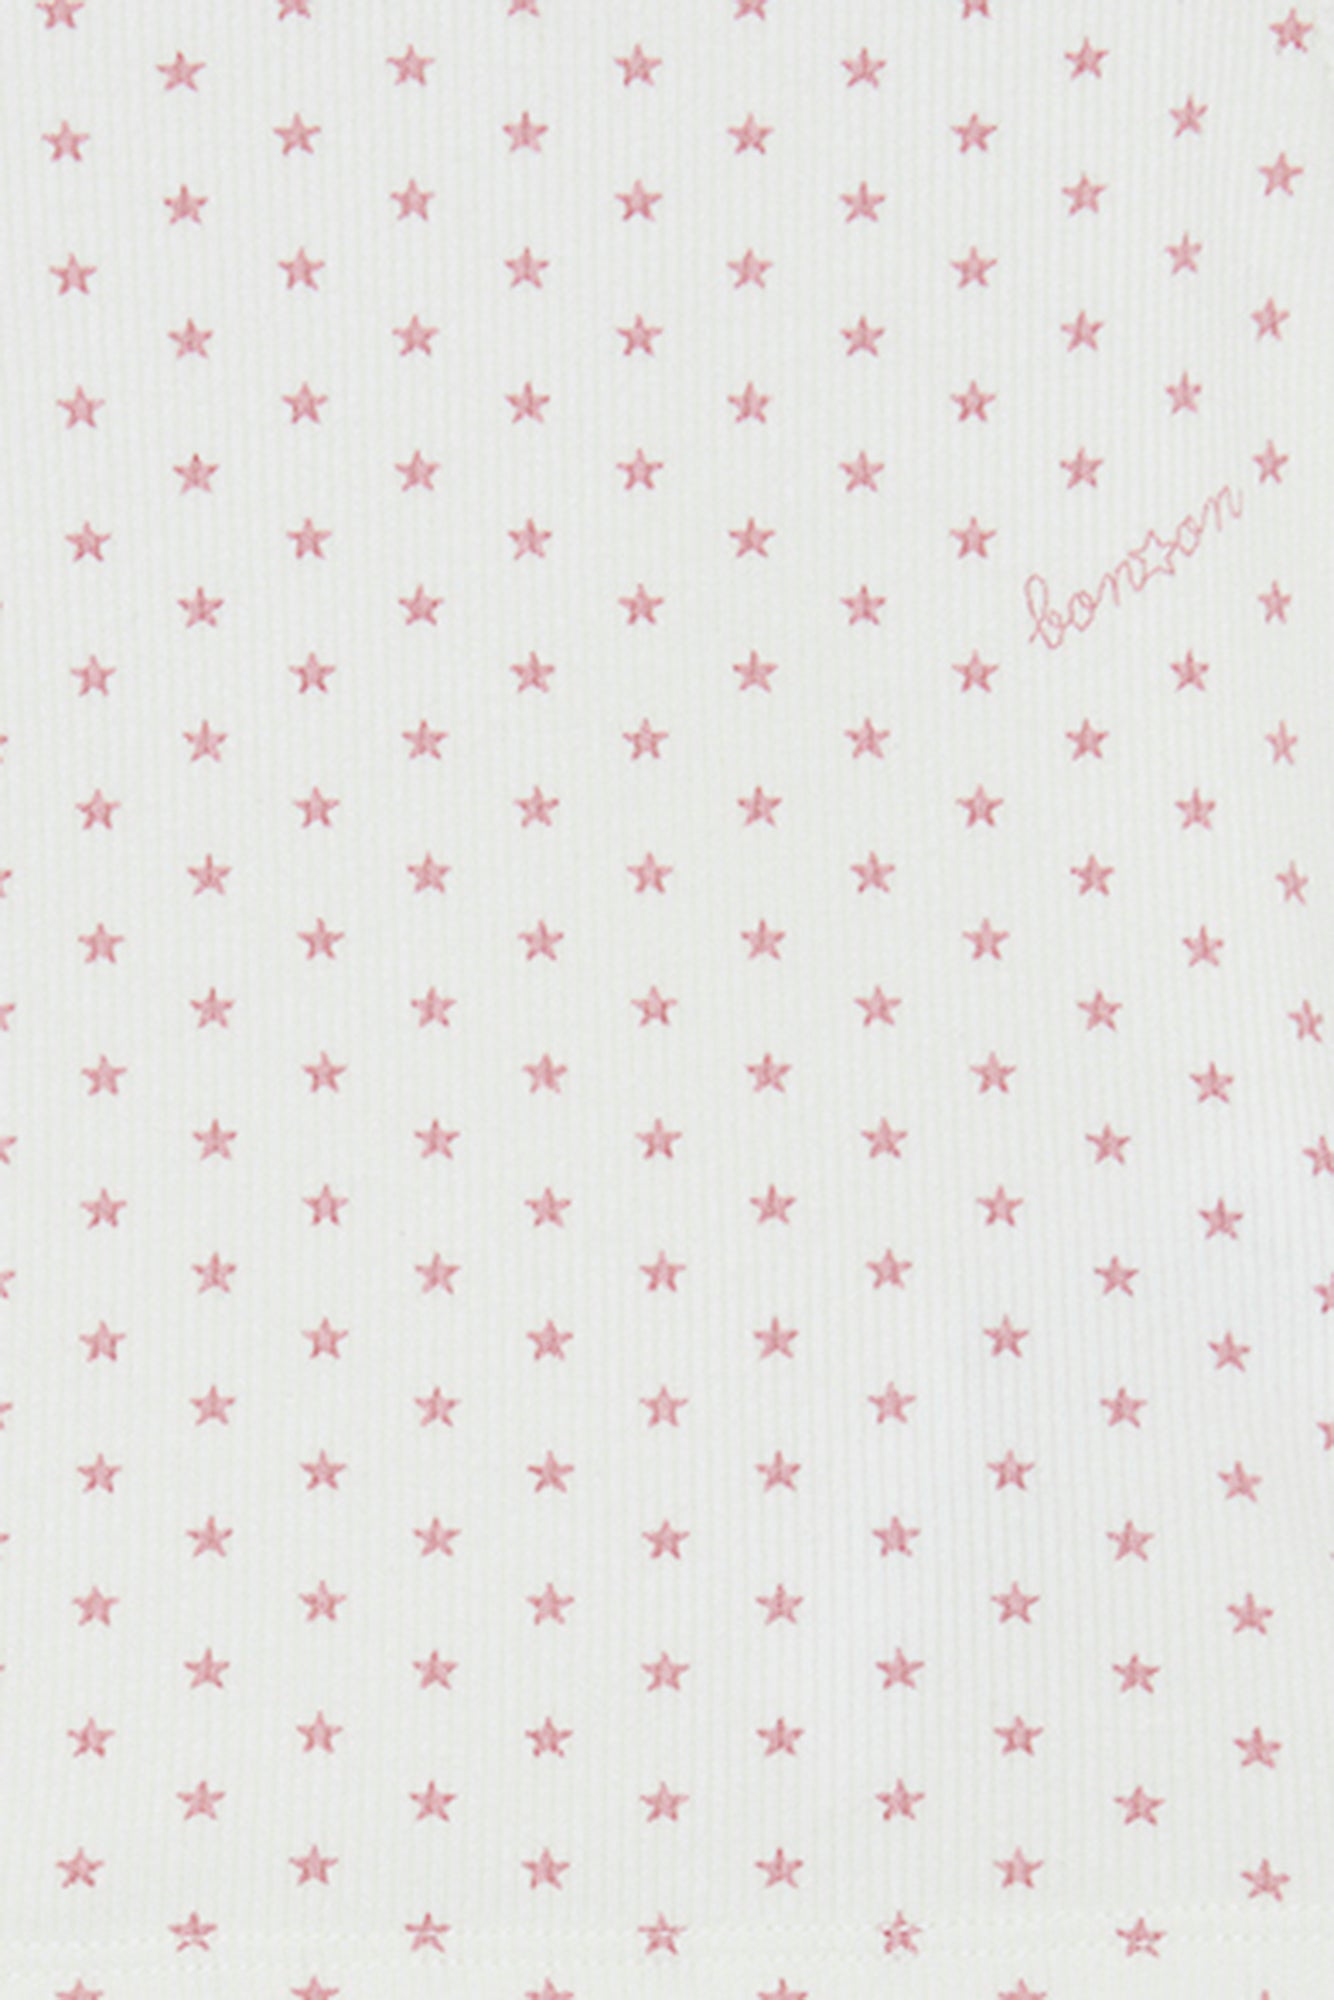 Outfit - Pajamas 2 rooms Pink Baby in cotton Print stars